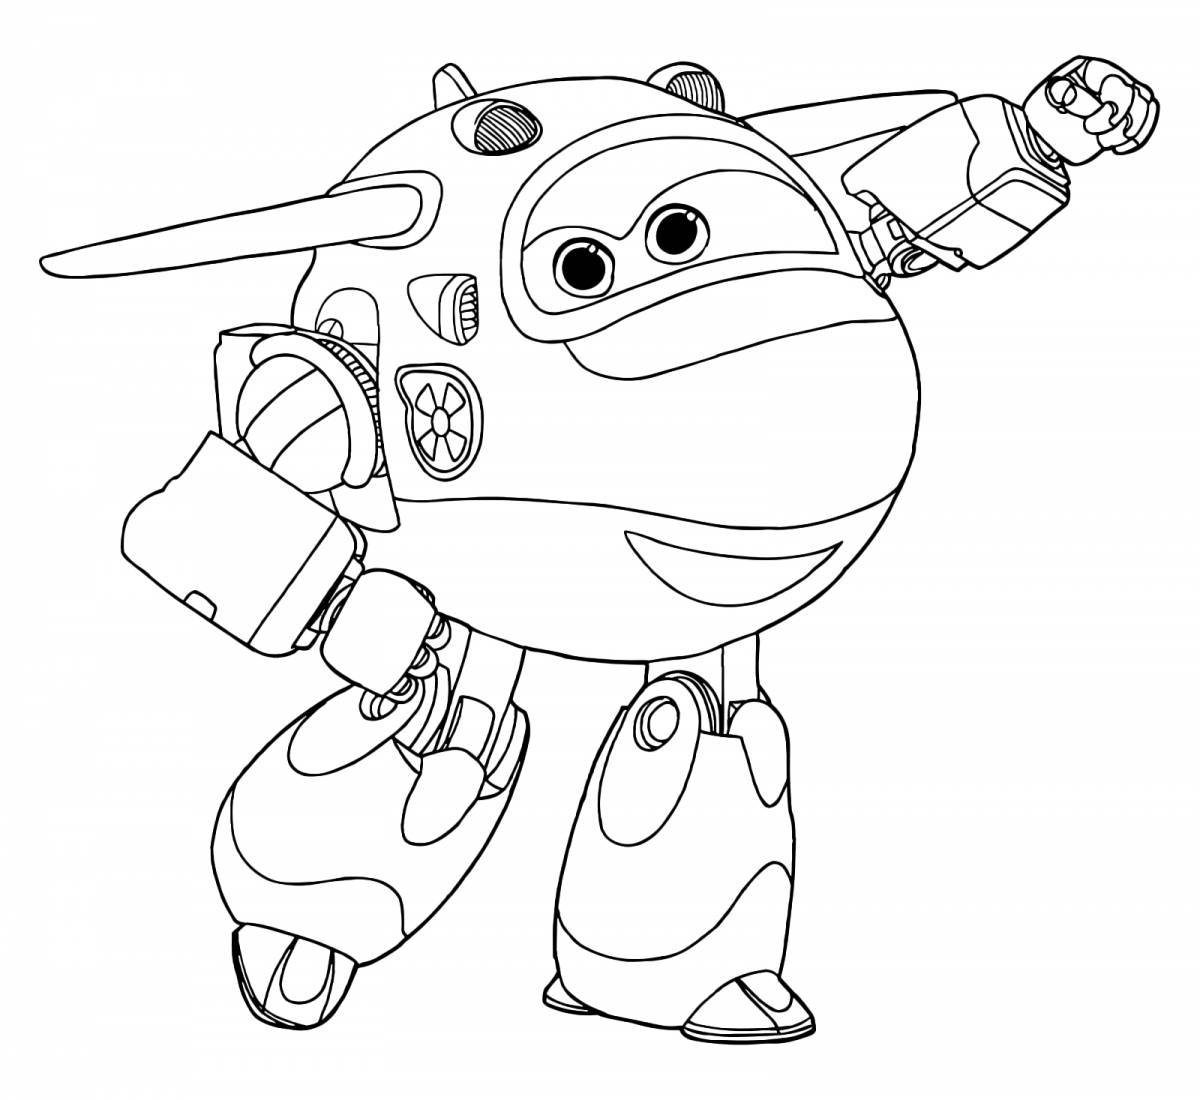 Colorful super wings coloring pages for kids